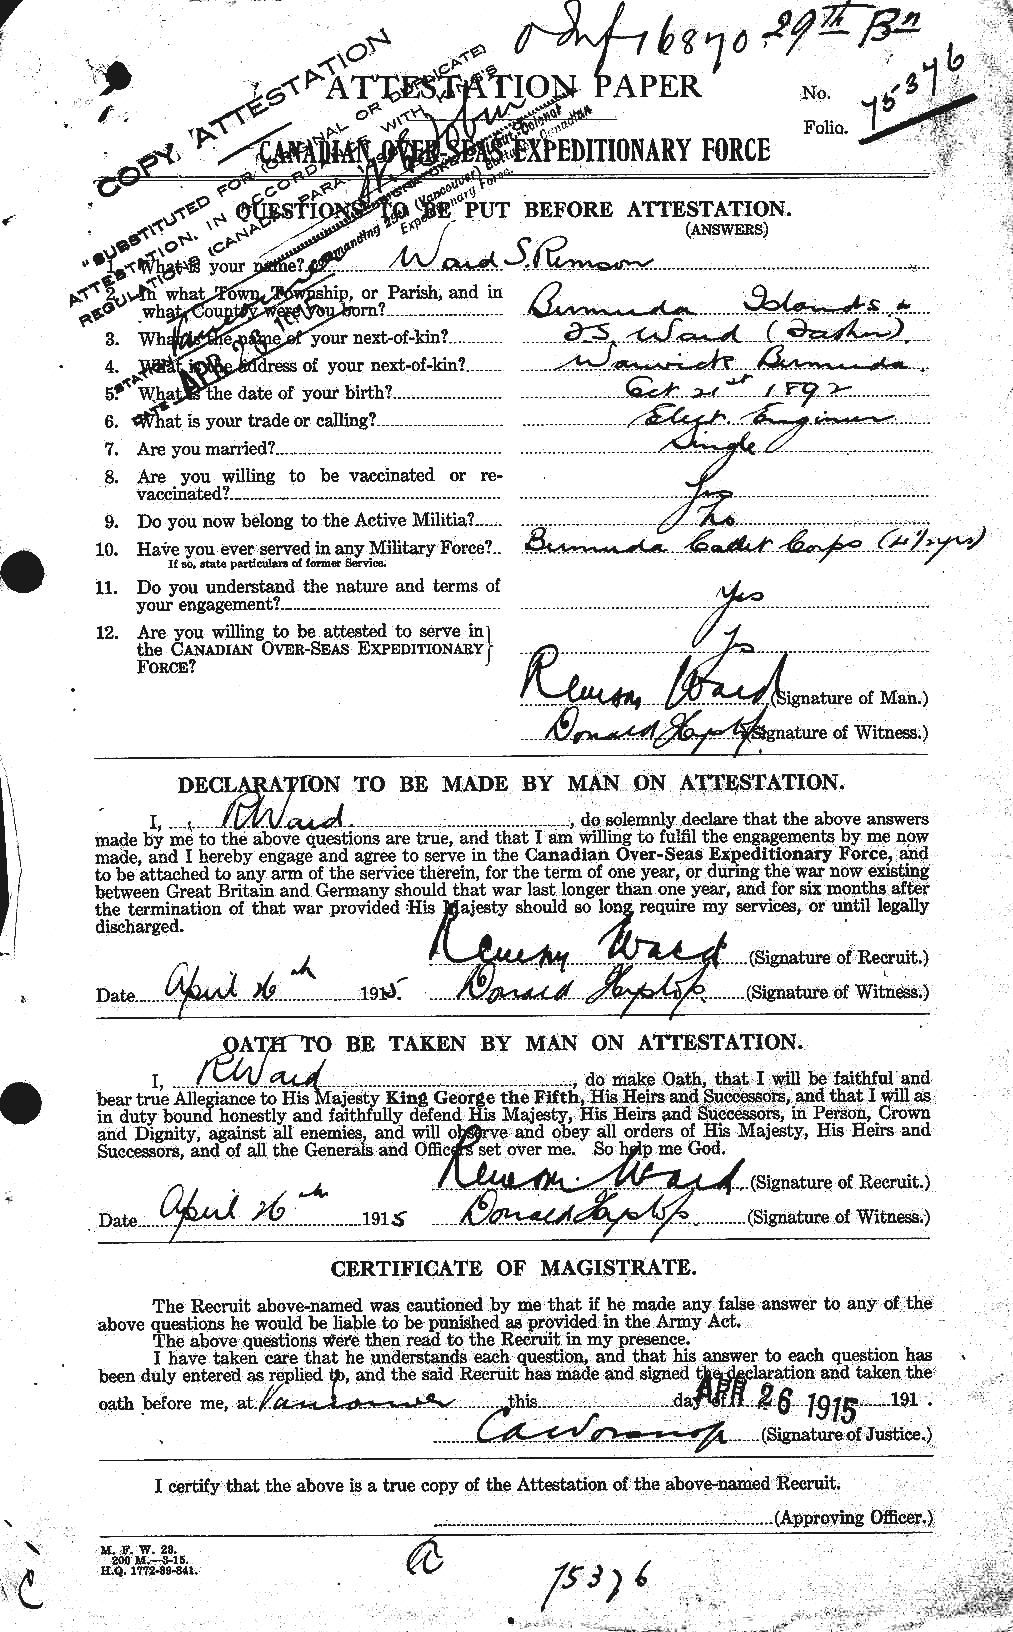 Personnel Records of the First World War - CEF 659645a